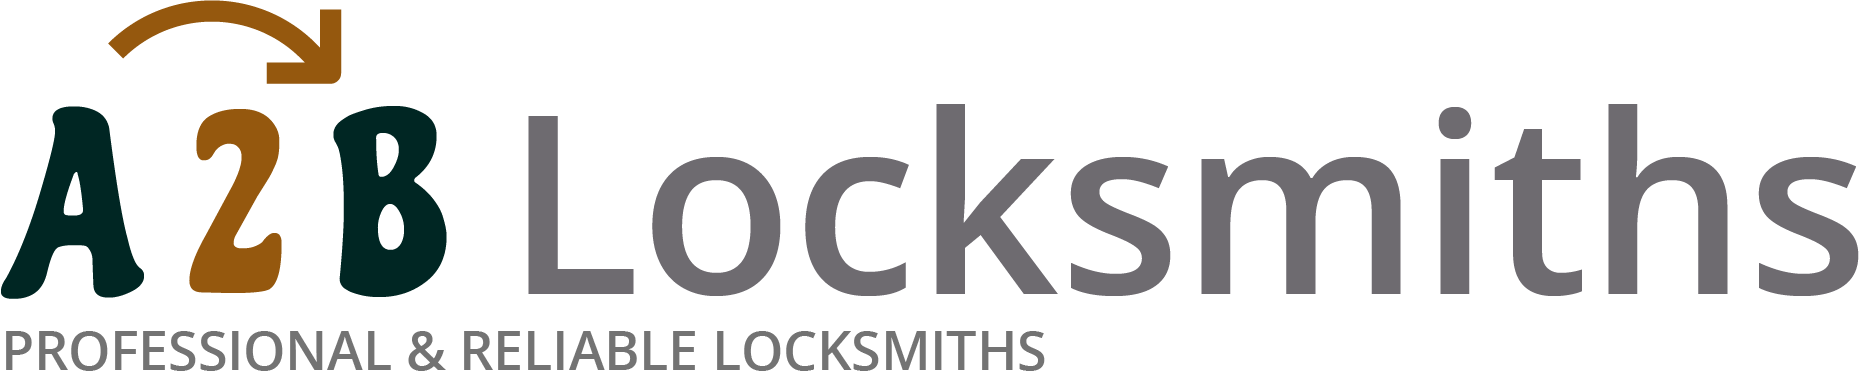 If you are locked out of house in Kidsgrove, our 24/7 local emergency locksmith services can help you.